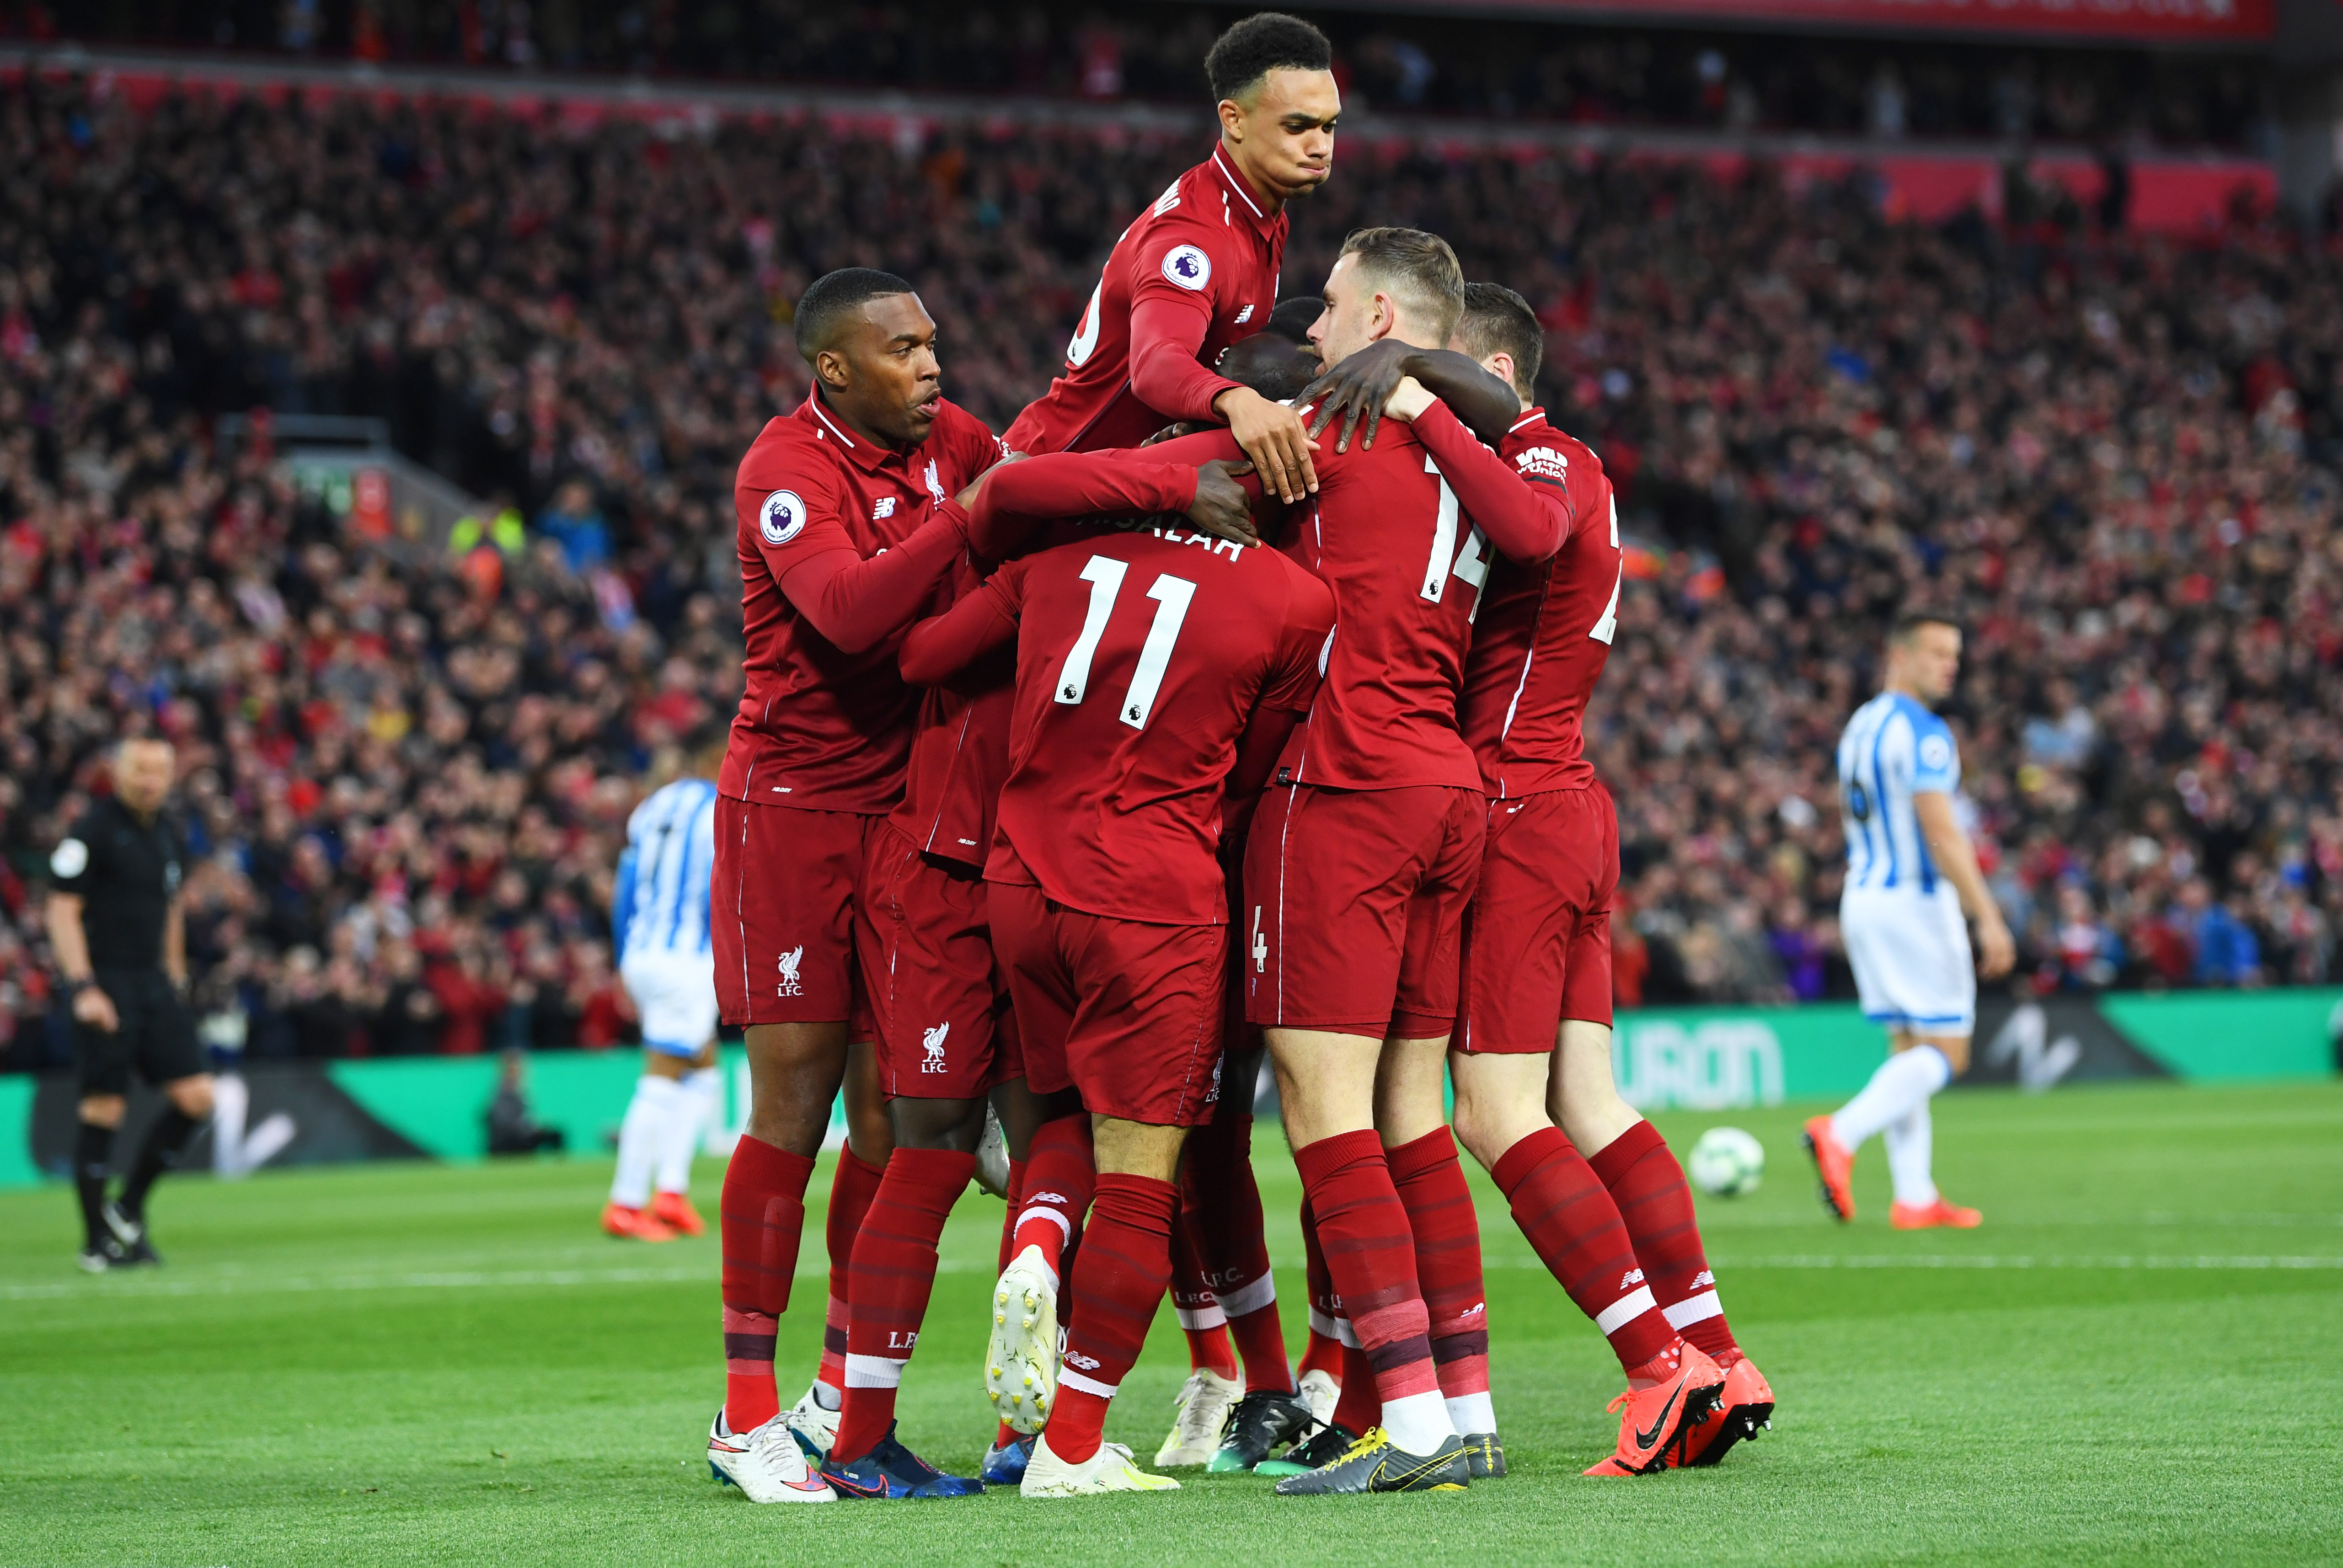 LIVERPOOL, ENGLAND - APRIL 26:  Naby Keita of Liverpool (obscured) celebrates after scoring his team's first goal with team mates during the Premier League match between Liverpool FC and Huddersfield Town at Anfield on April 26, 2019 in Liverpool, United Kingdom. (Photo by Michael Regan/Getty Images)